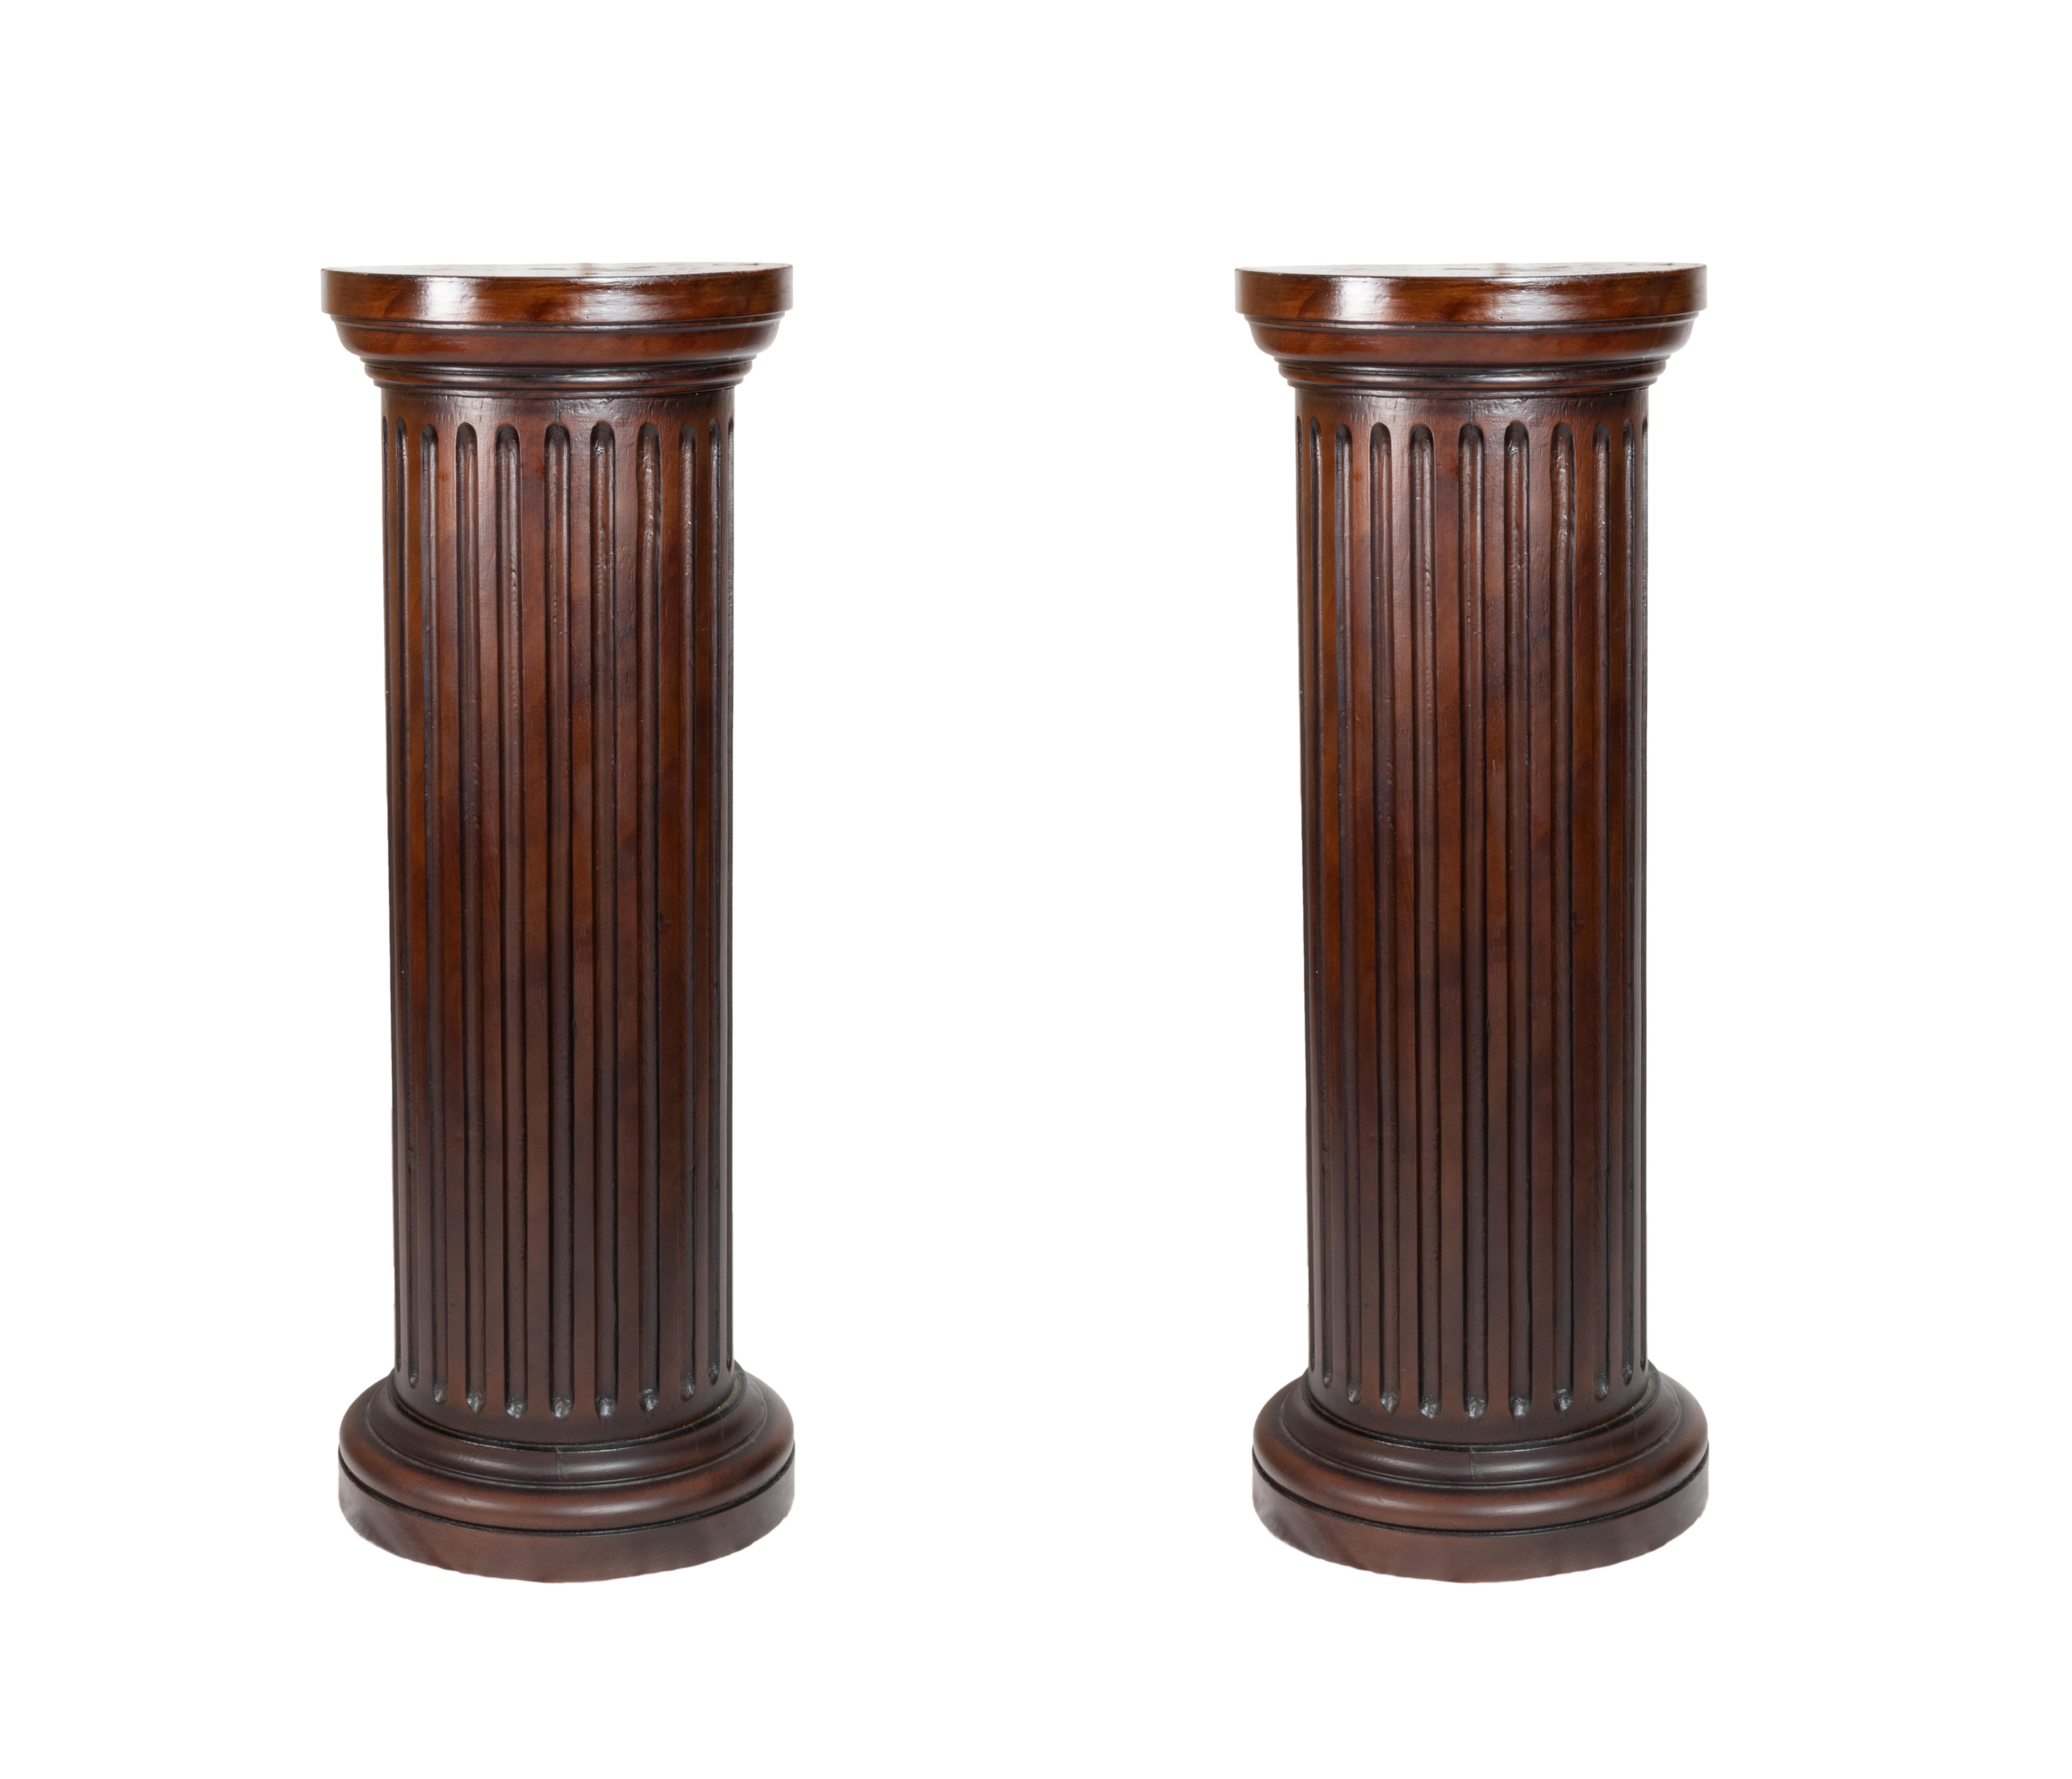  Pair Of French Fluted Wood Columns, 19th Century For Sale 2